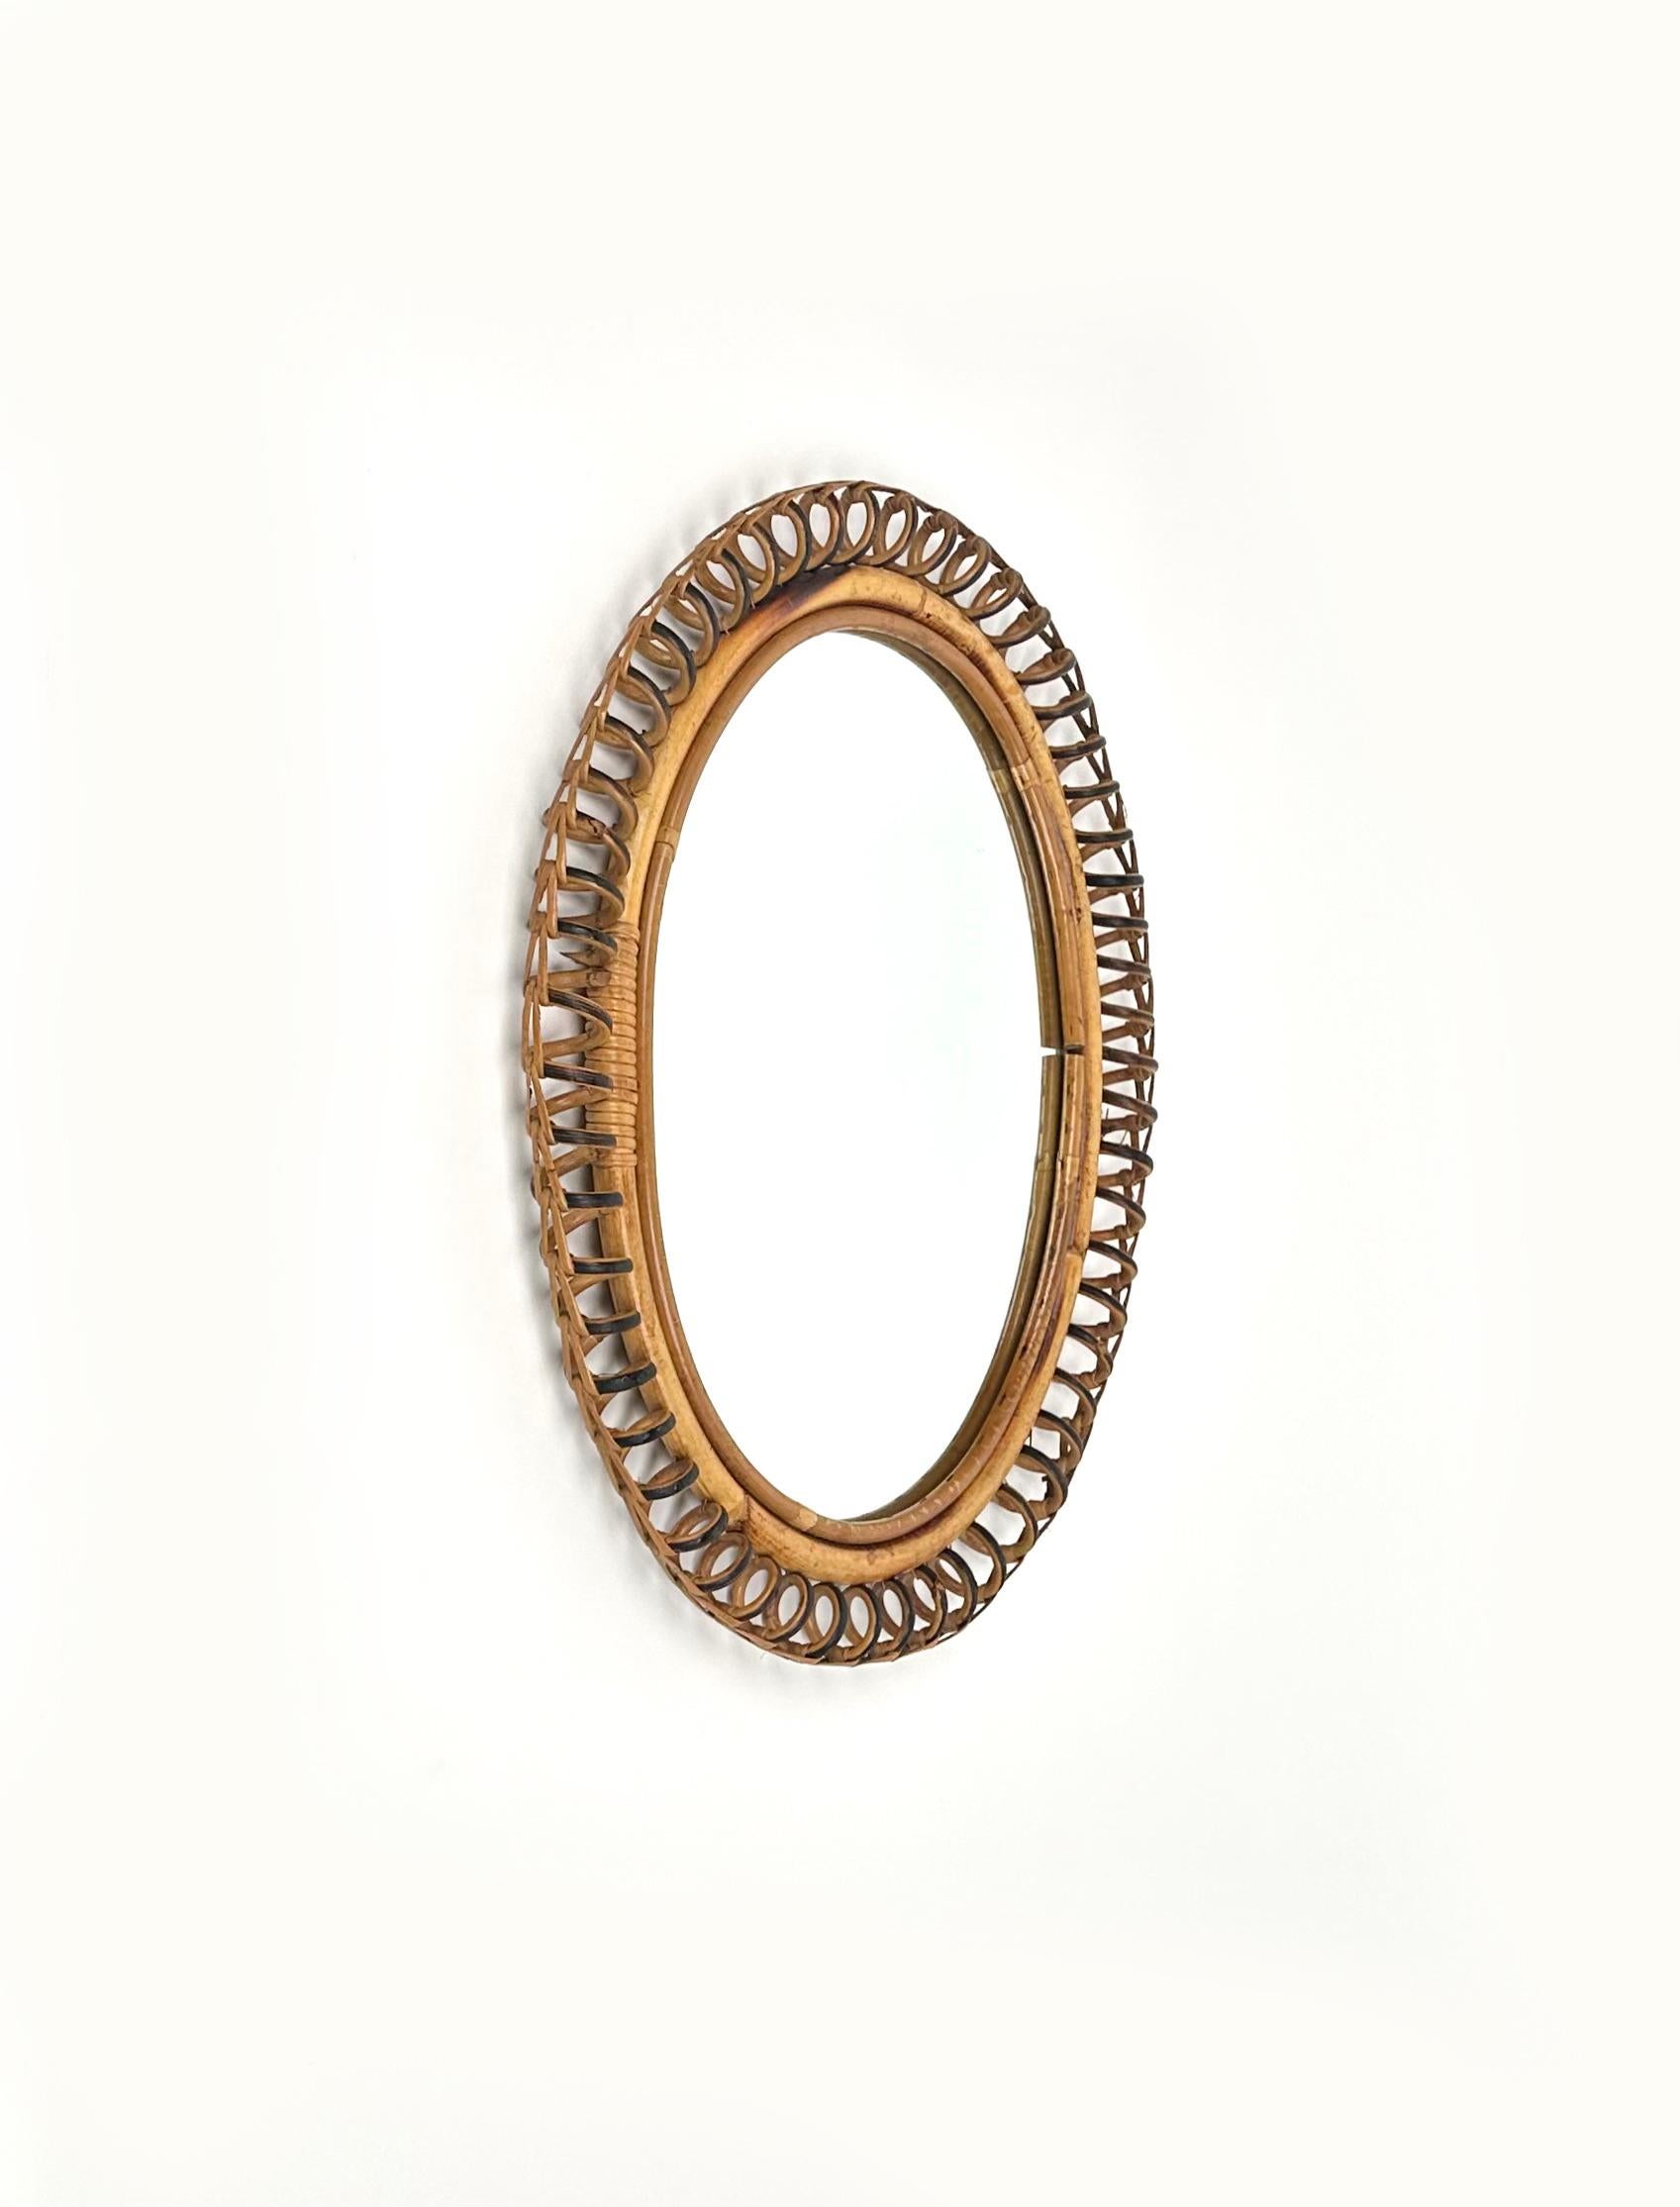 Midcentury Rattan and Bamboo Oval Wall Mirror Franco Albini Style, Italy 1960s In Good Condition For Sale In Rome, IT